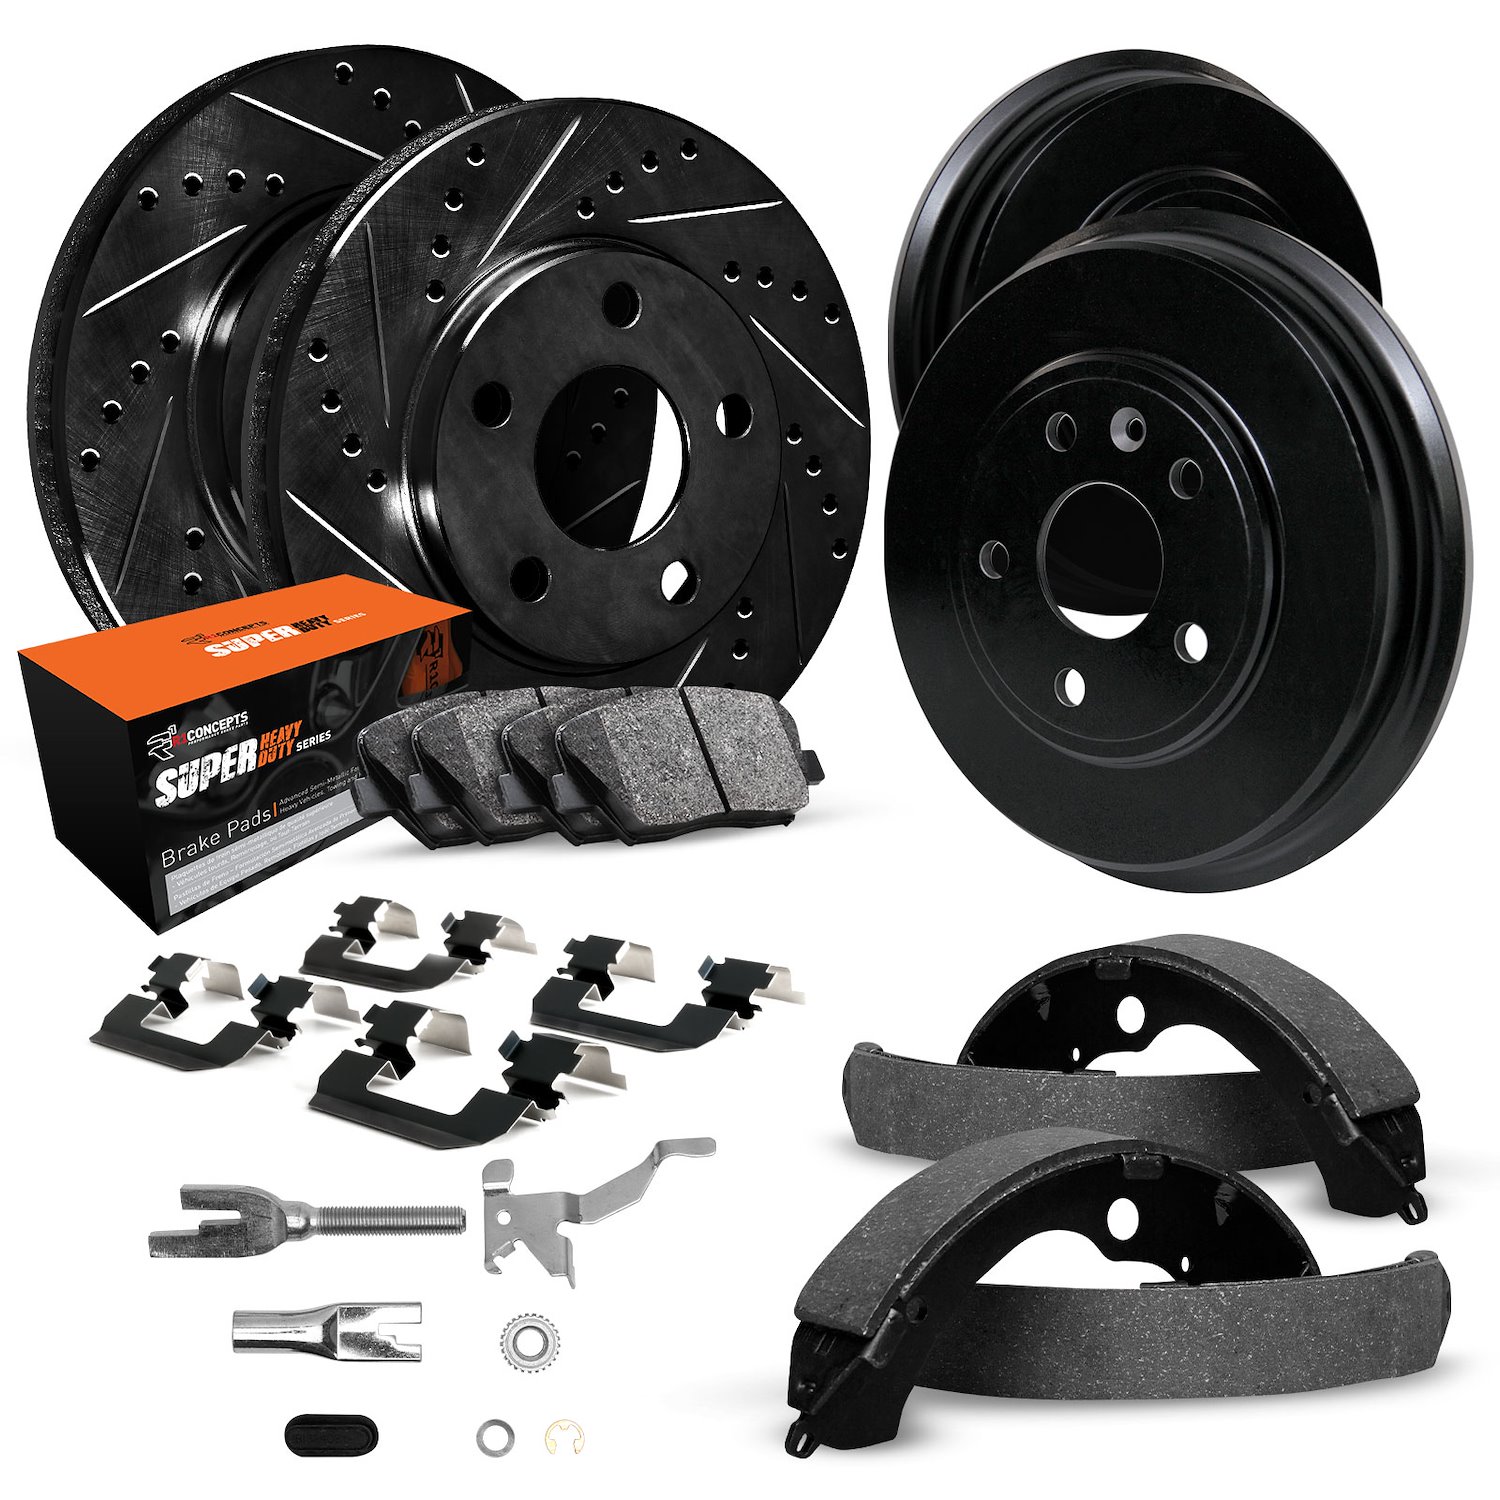 E-Line Drilled/Slotted Black Rotor & Drum Set w/Super-Duty Pads, Shoes, Hardware/Adjusters, 1990-1990 GM